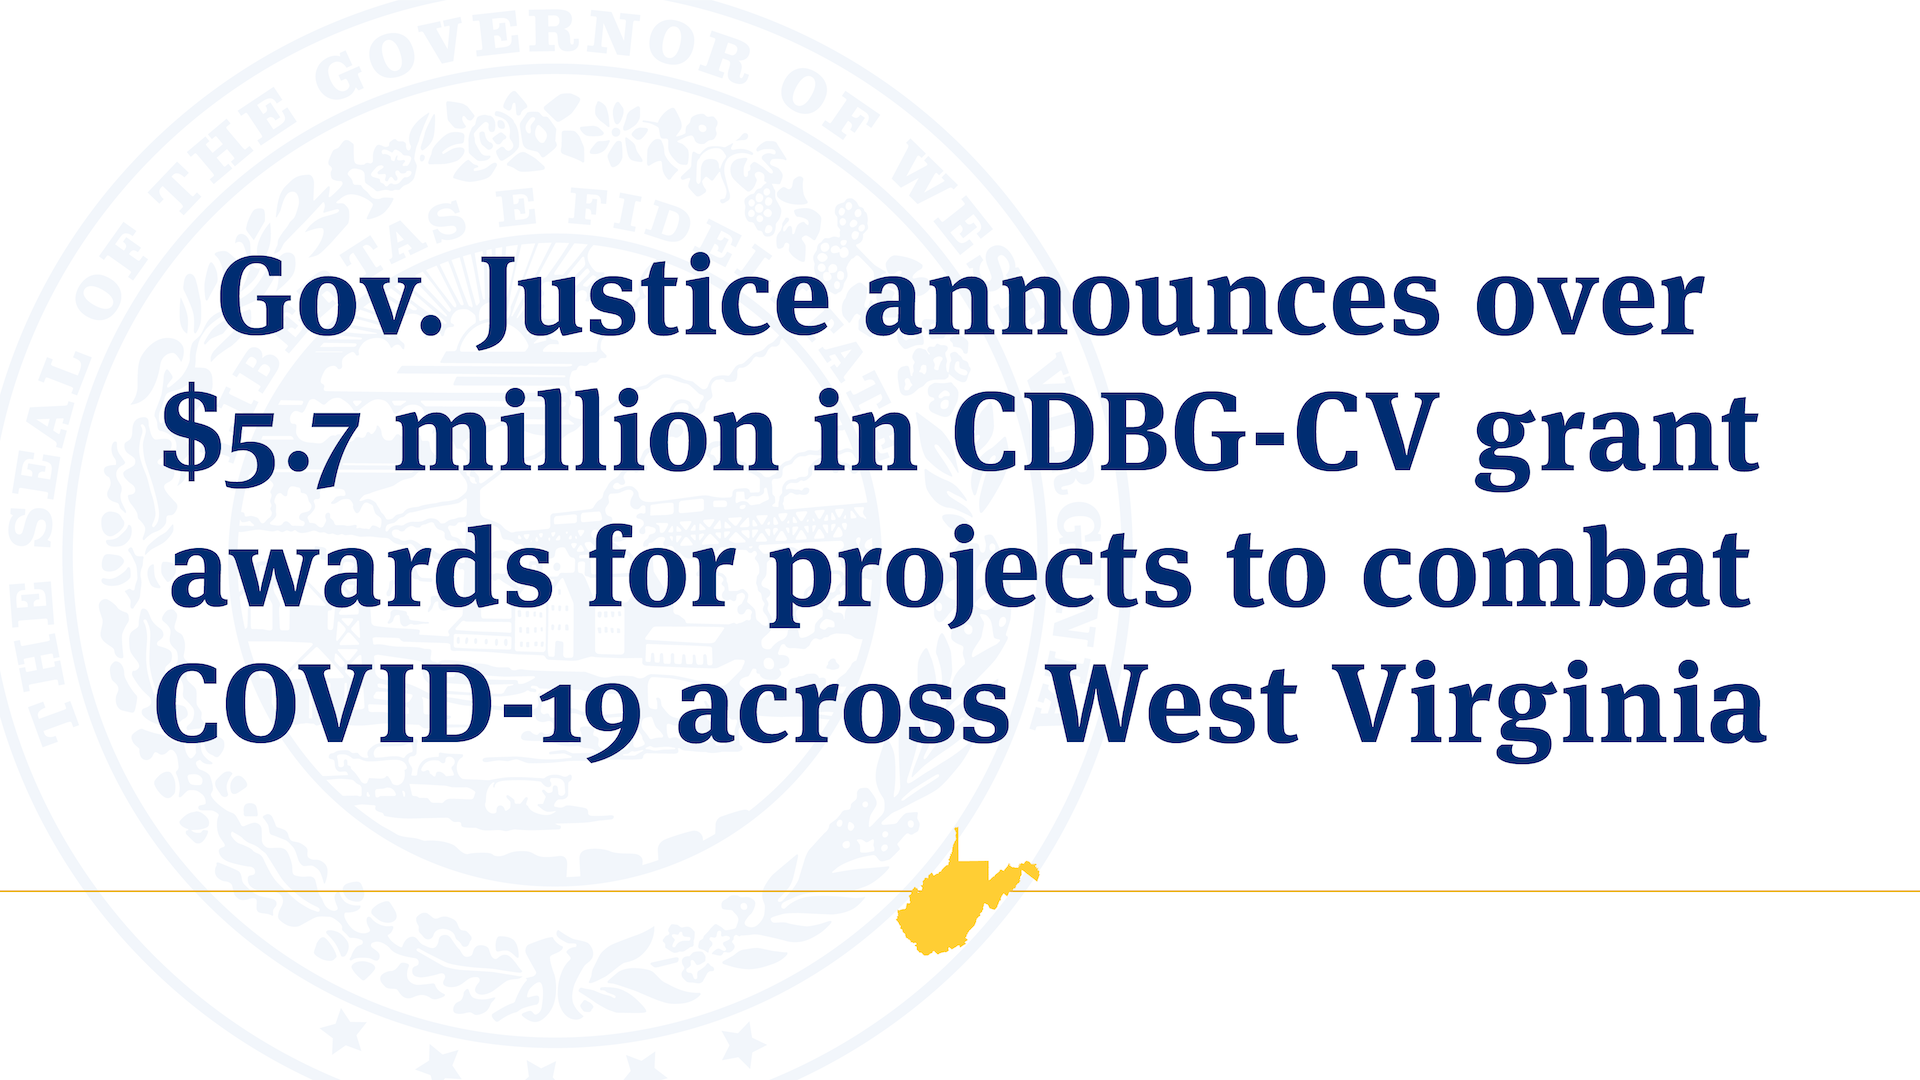 Gov. Justice announces over $5.7 million in CDBG-CV grant awards for projects to combat COVID-19 across West Virginia